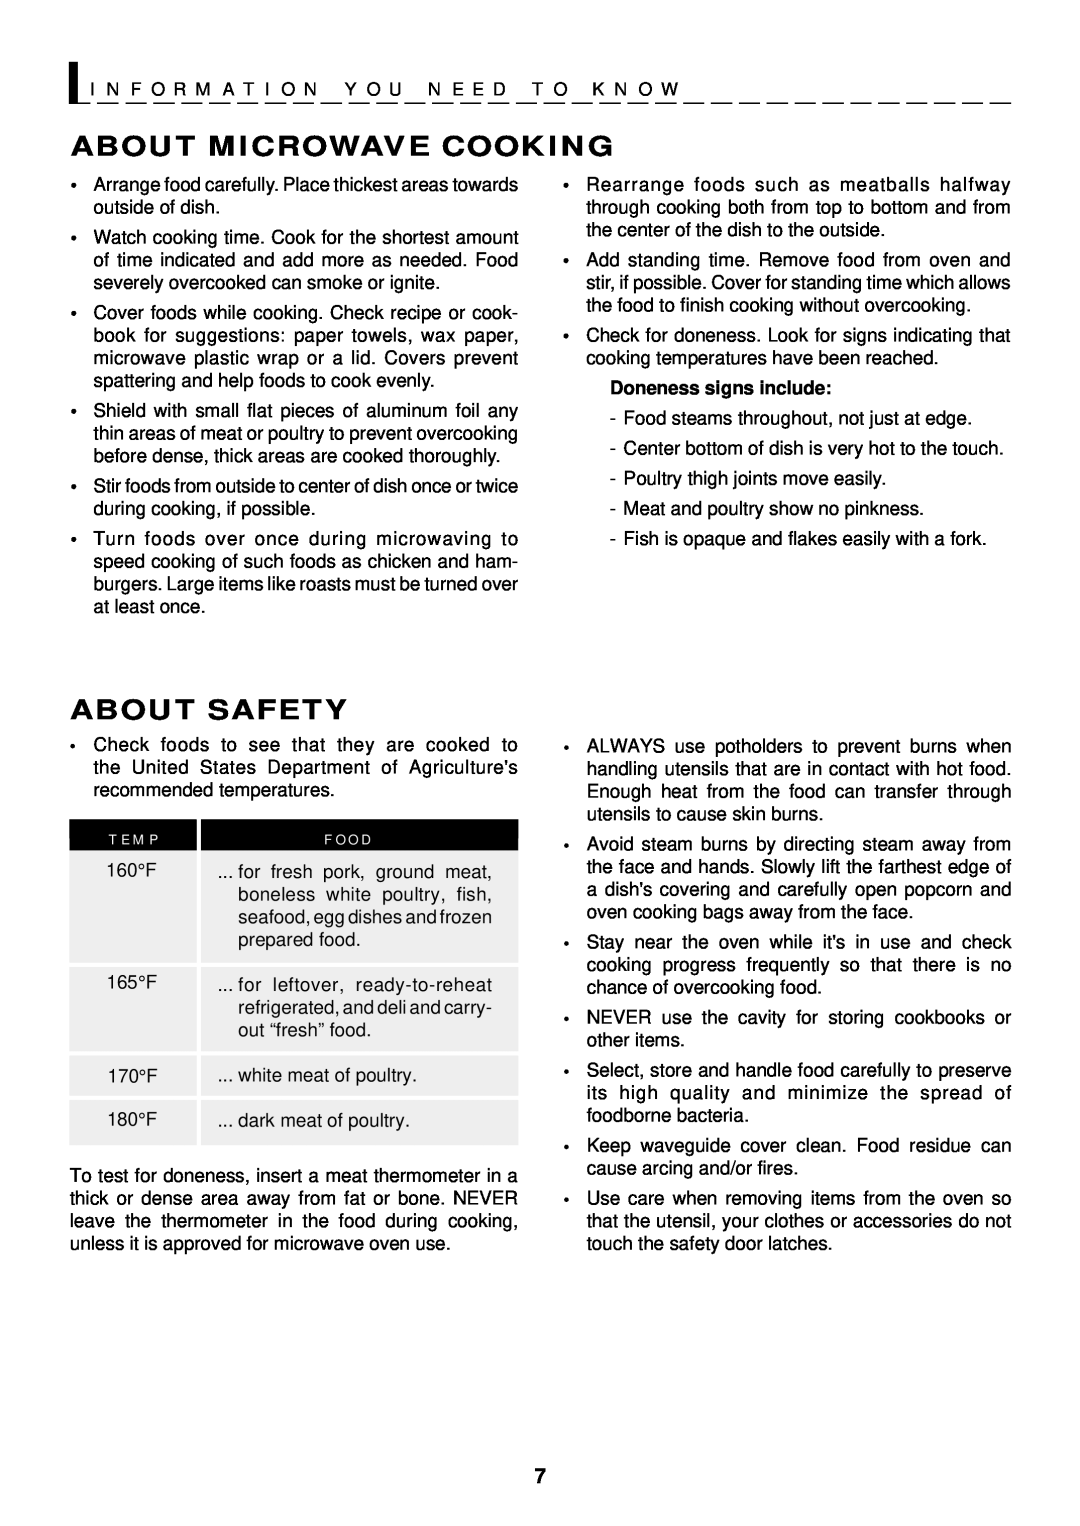 Sharp R-1611 About Microwave Cooking, About Safety, T E M P, F O O D, I N F O R M A T I O N Y O U N E E D T O K N O W 